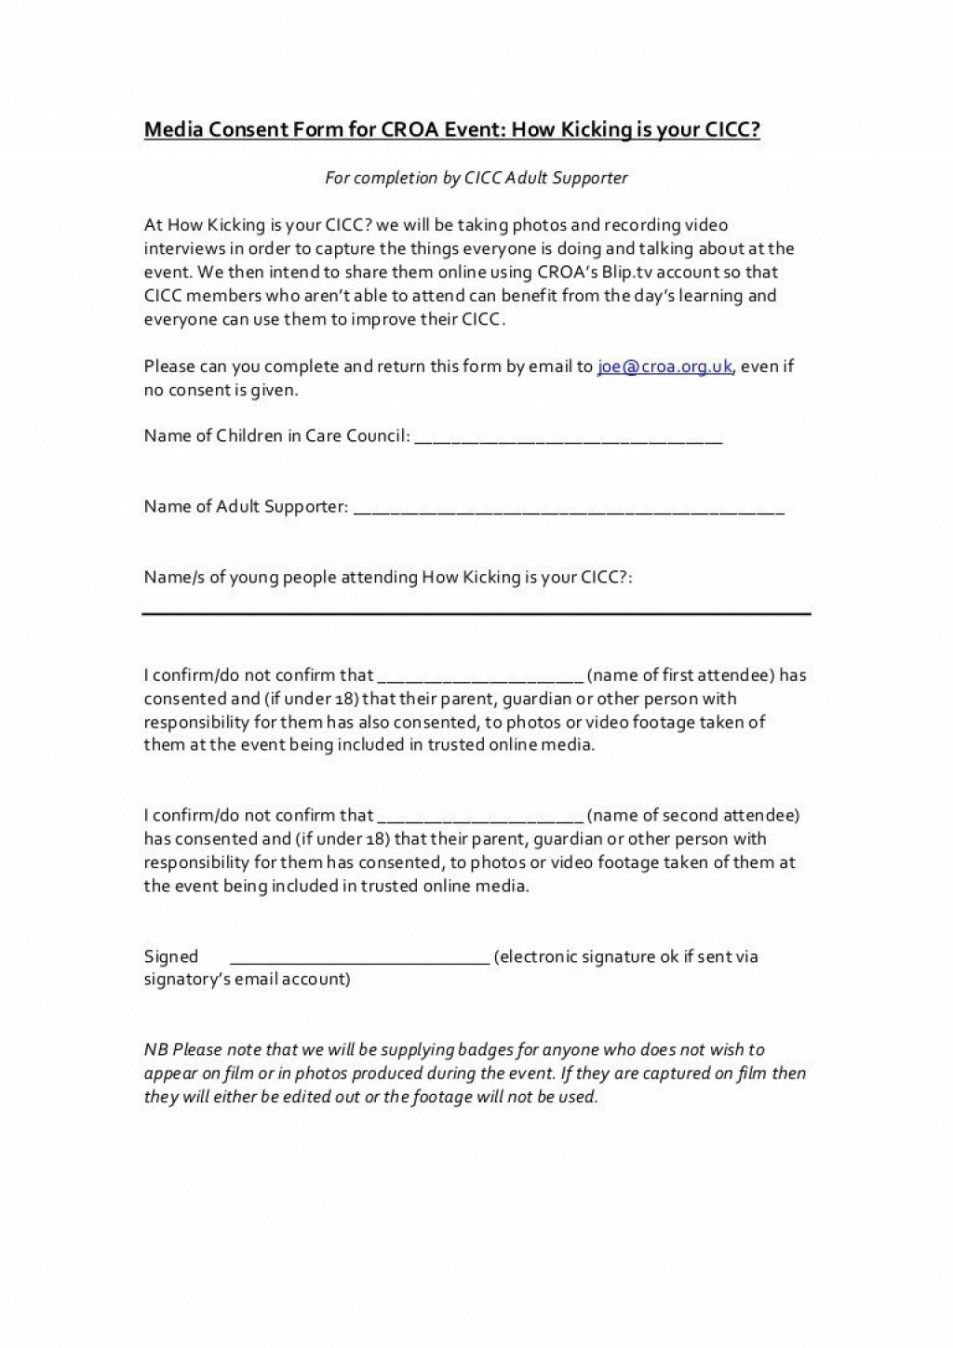 Costum Social Media Photo Release Form Template  Example